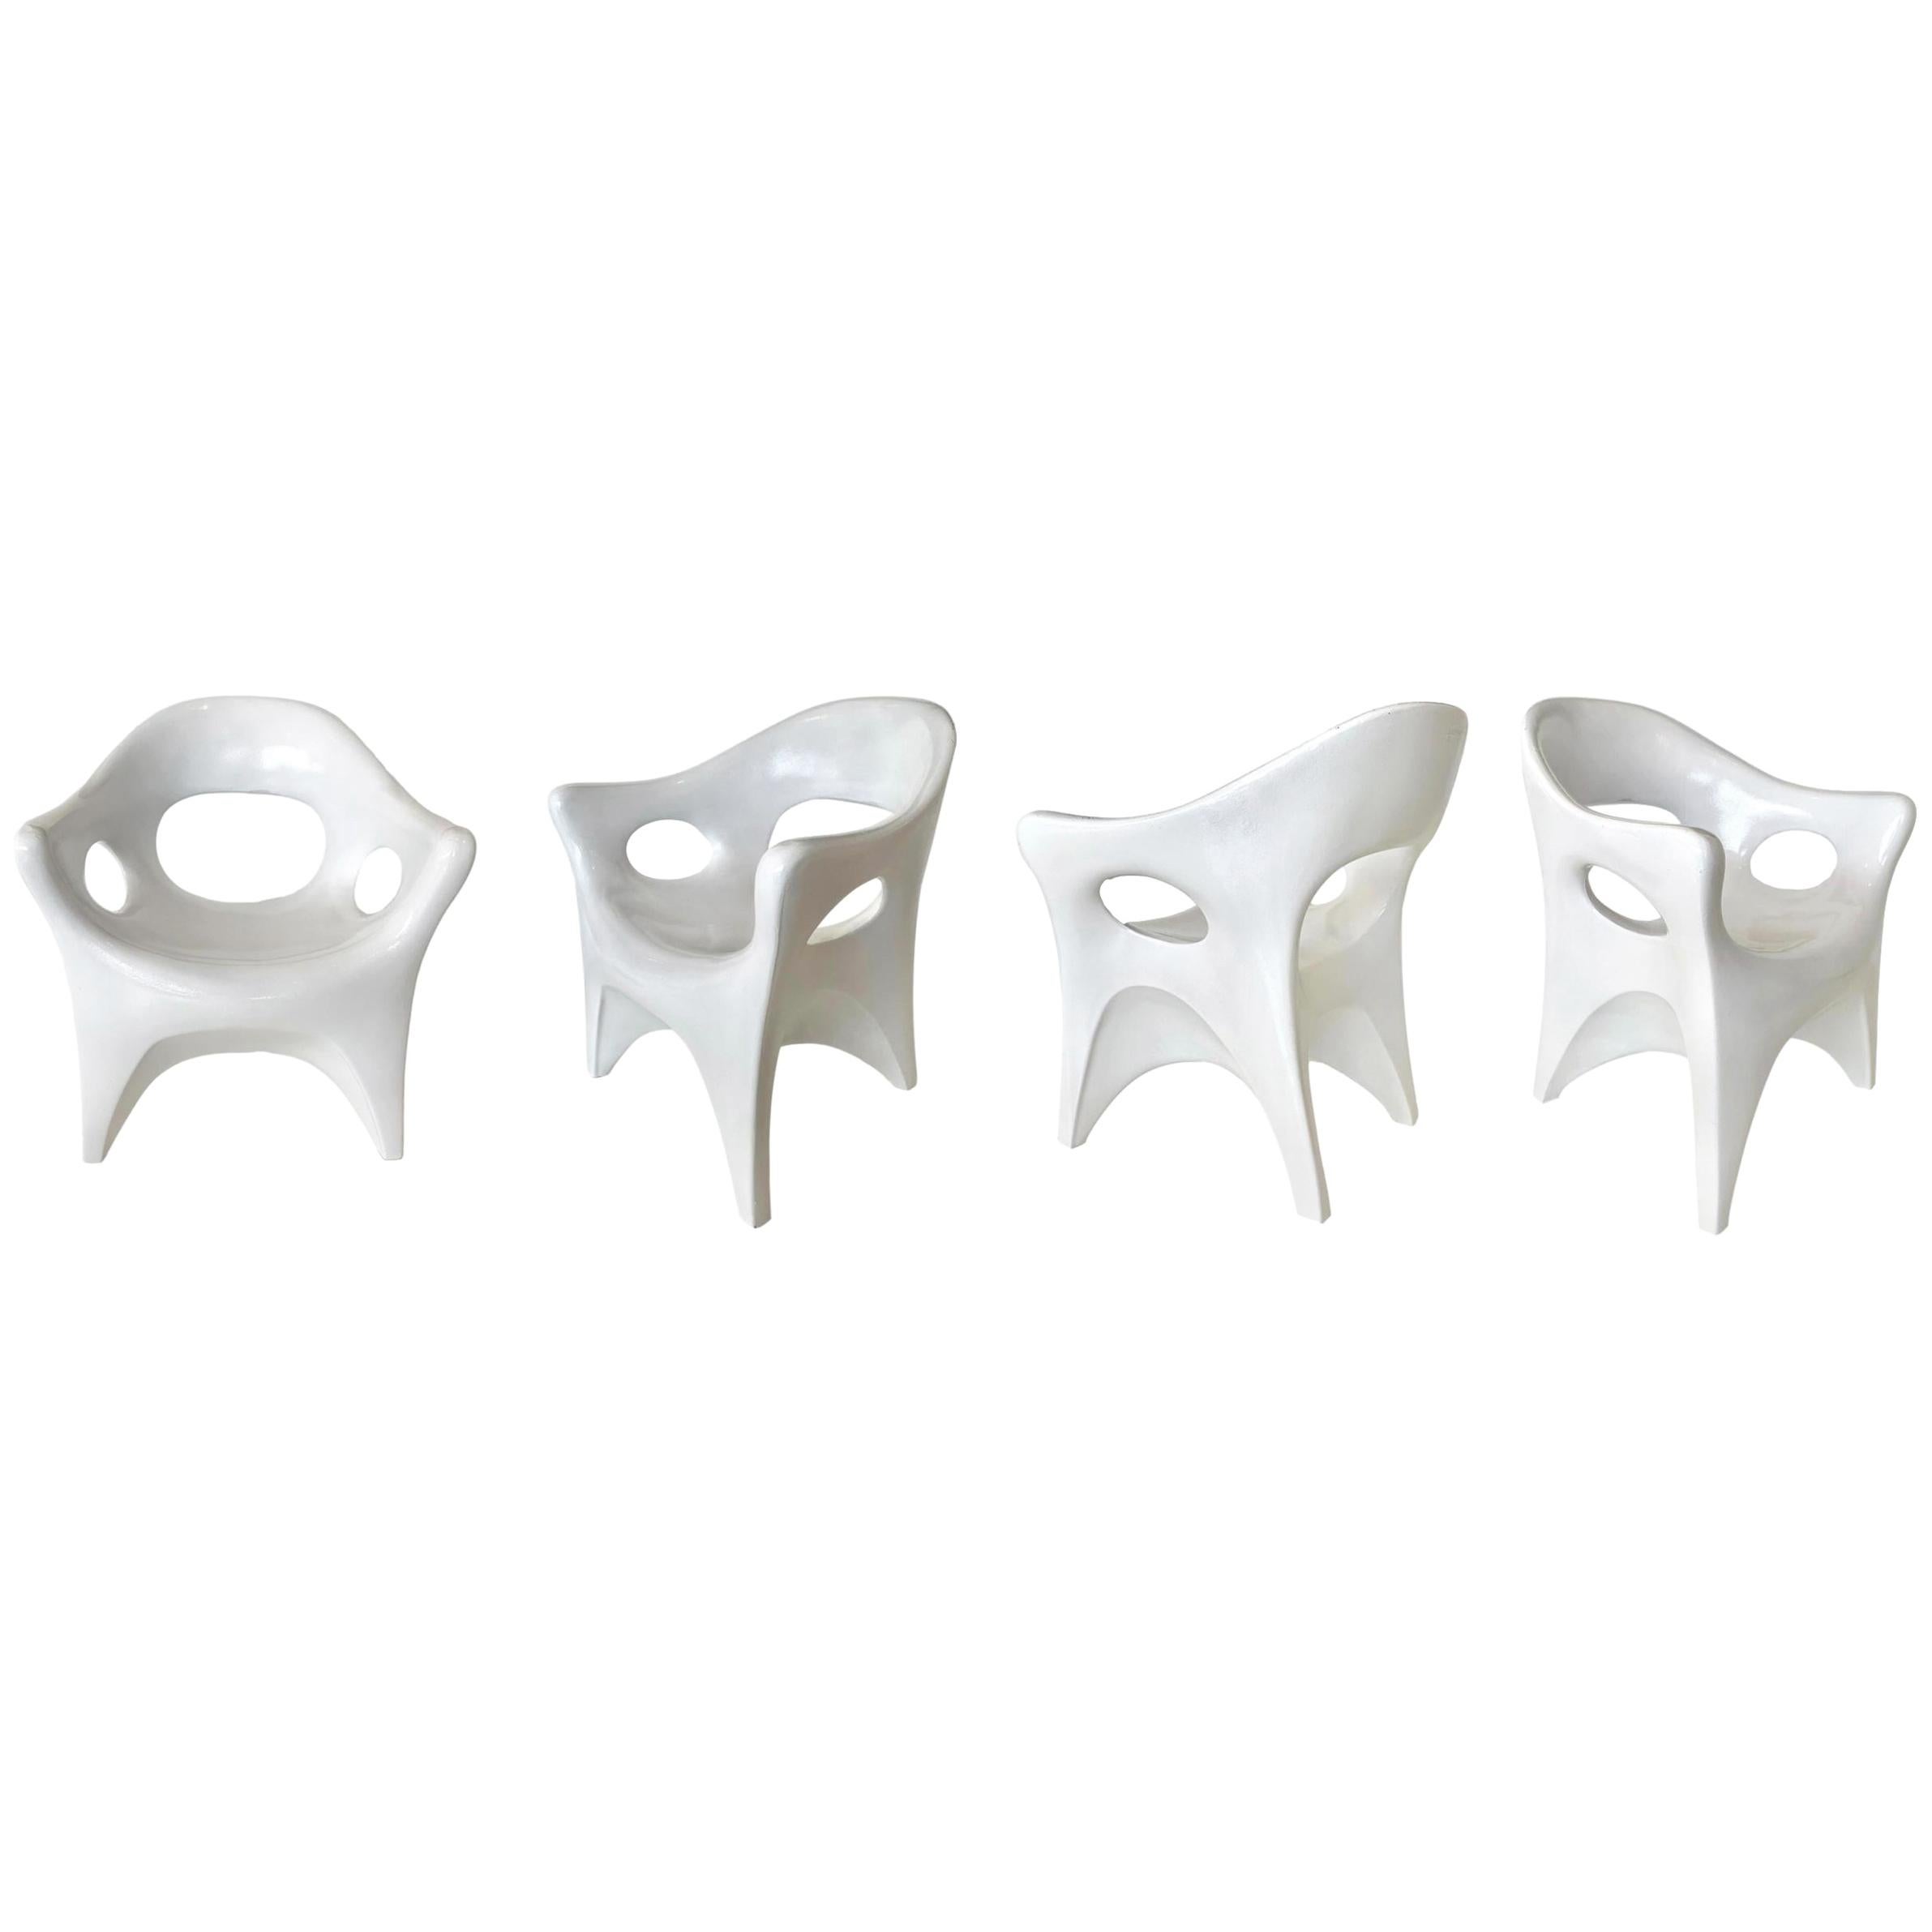 Set of 4 Sculptural Plastic Chairs by John Gale, 1963 For Sale